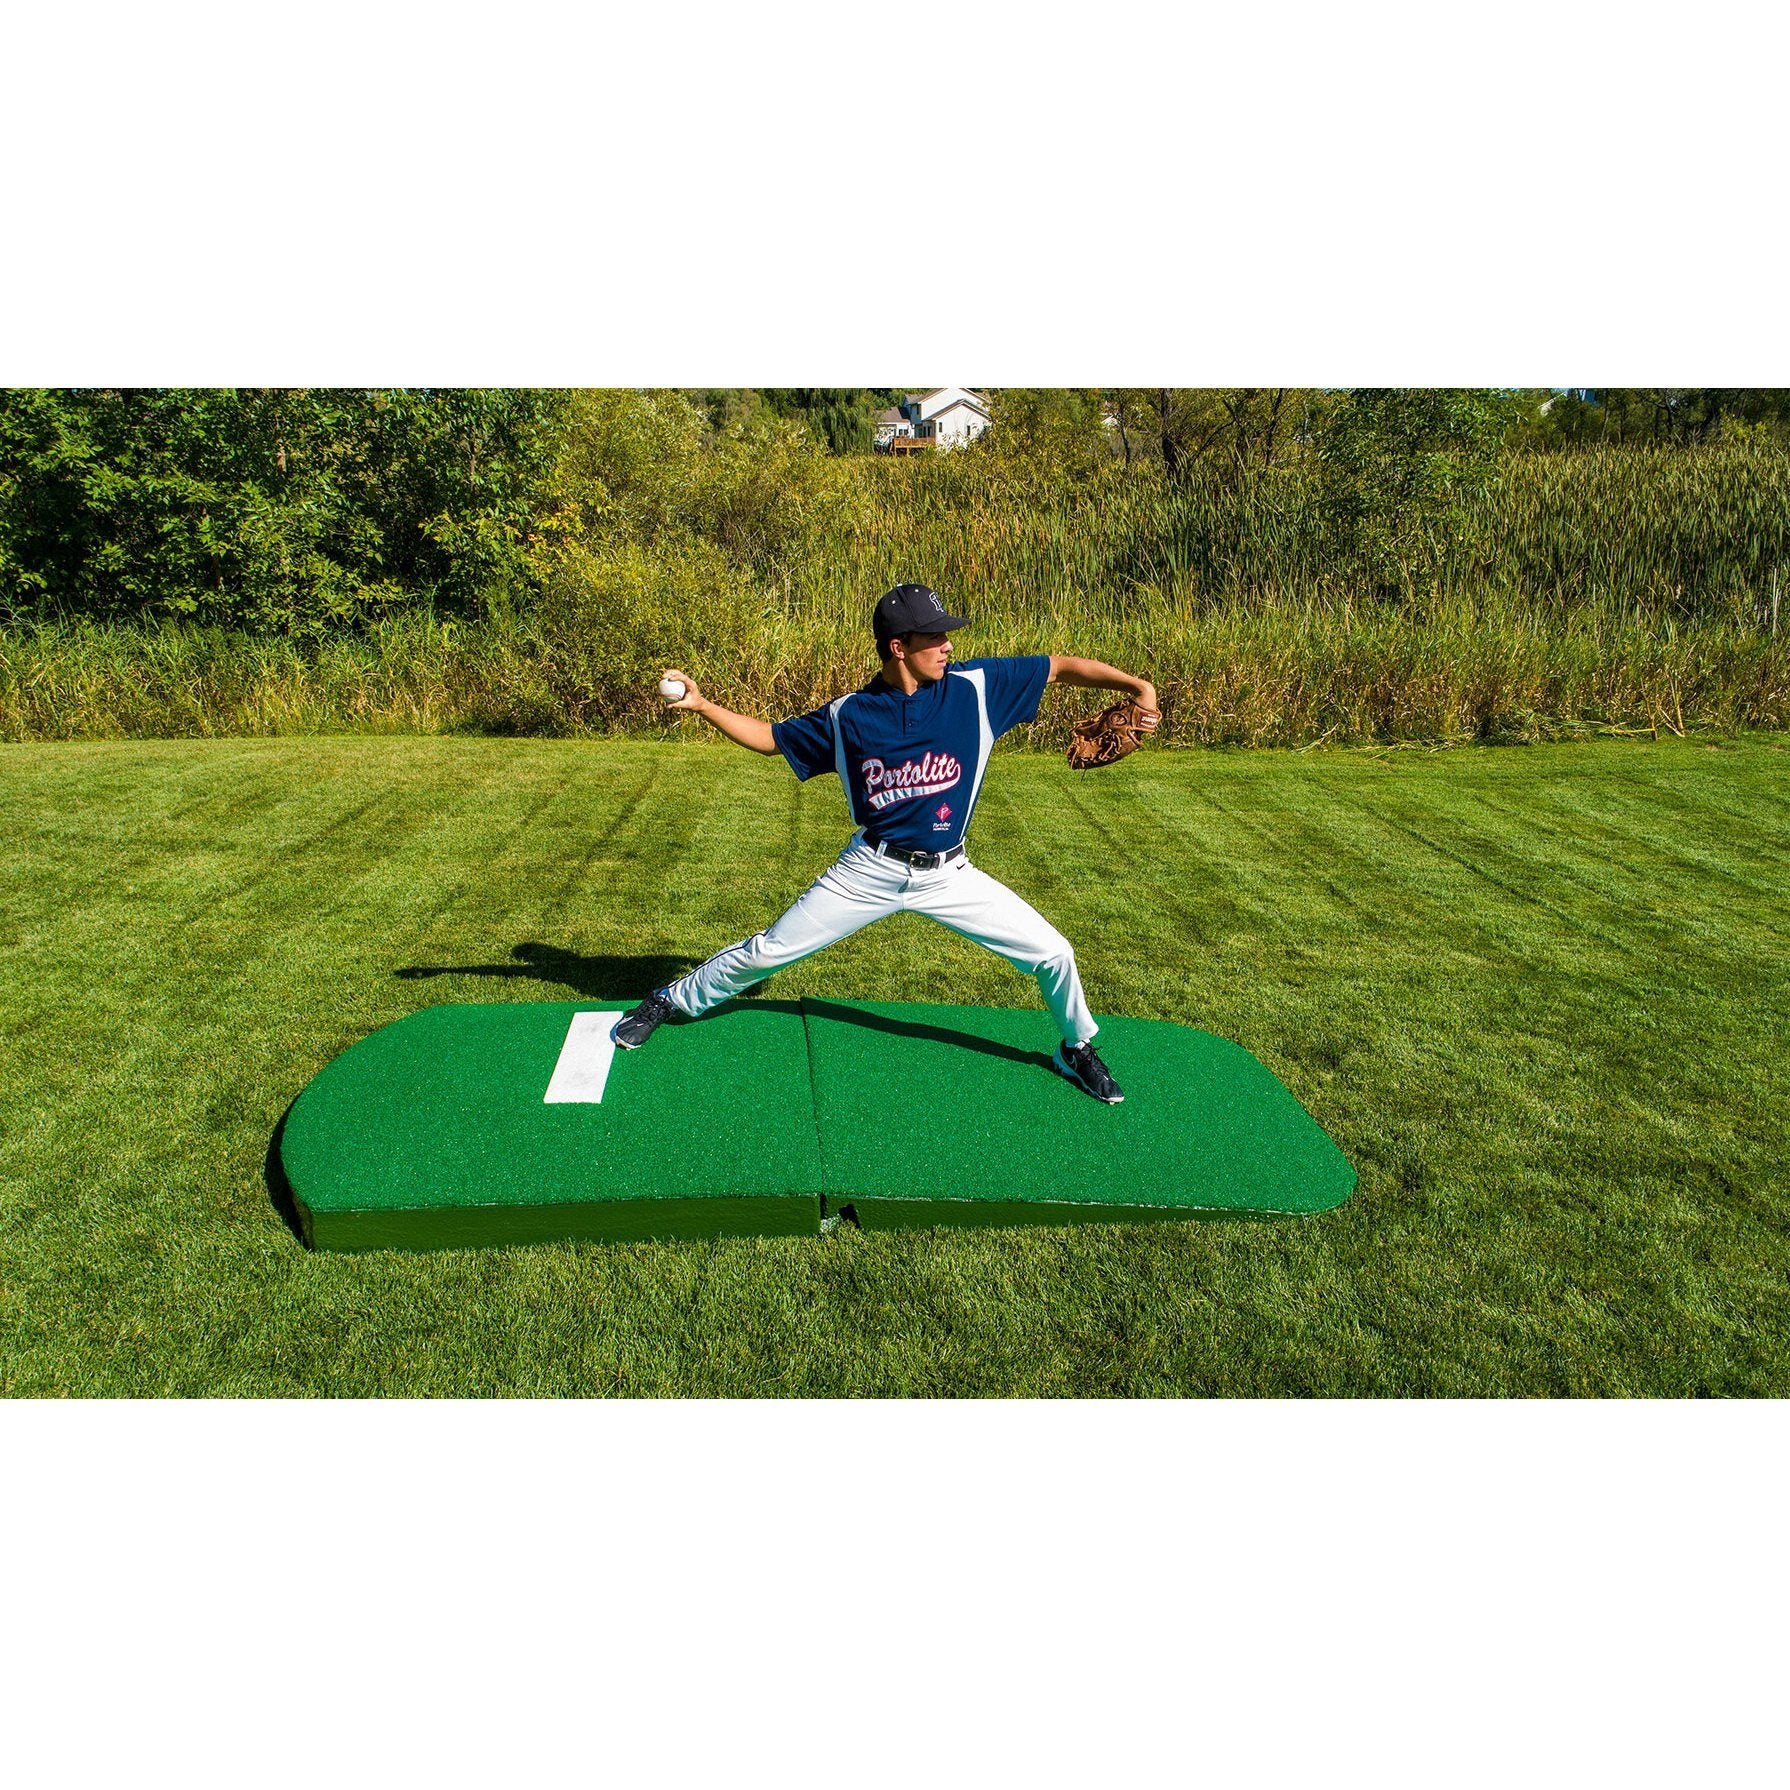 Portolite 10" Full Size 2-Piece Portable Practice Pitching Mound green top angle view pitcher